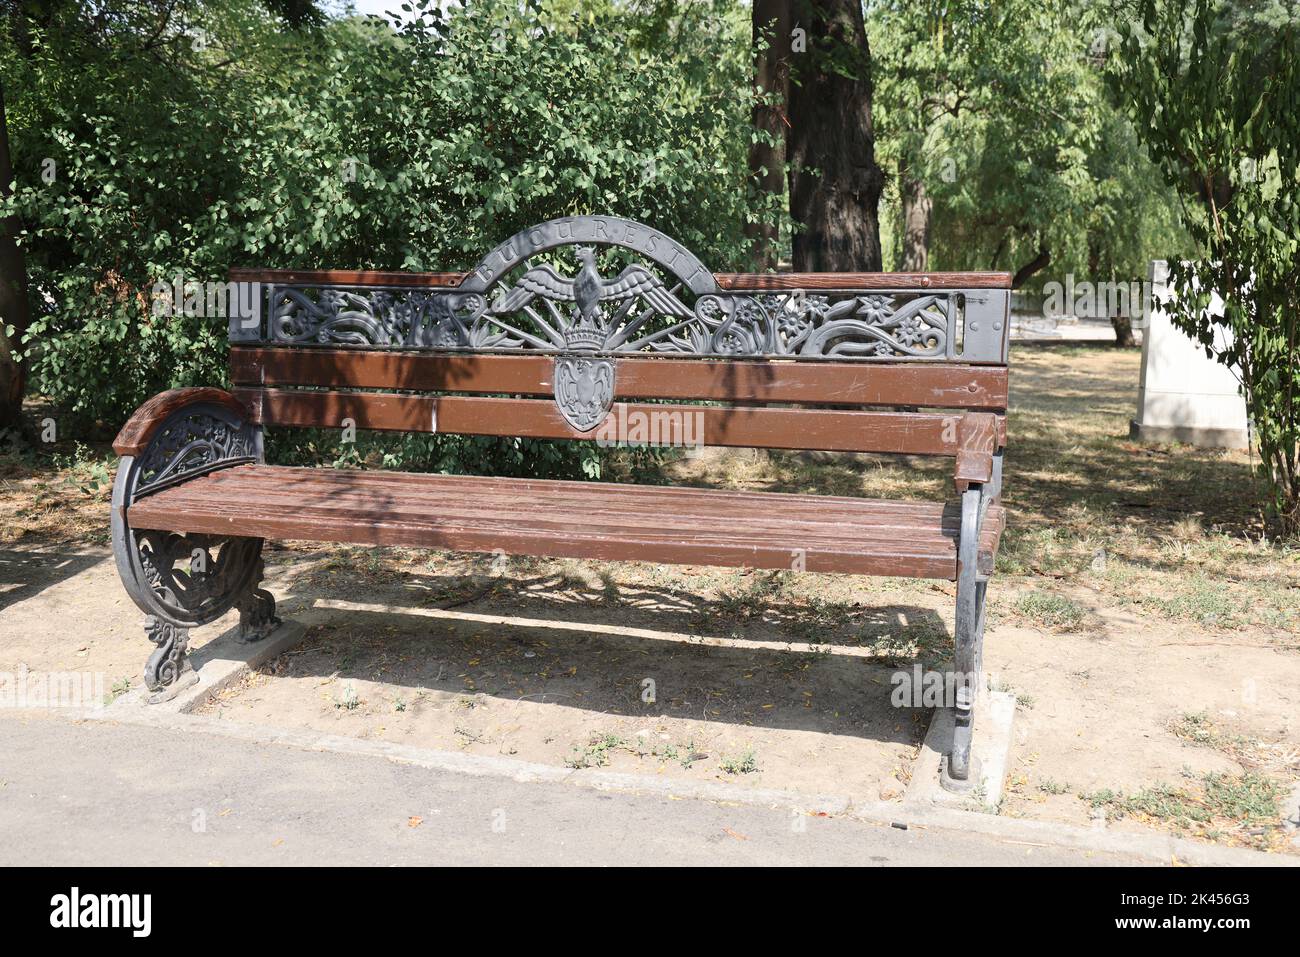 Historic wooden bench in Cișmigiu park, Bucharest, Romania with metal decoration including the Wallachian Eagle as the symbol of the city of Bucharest Stock Photo